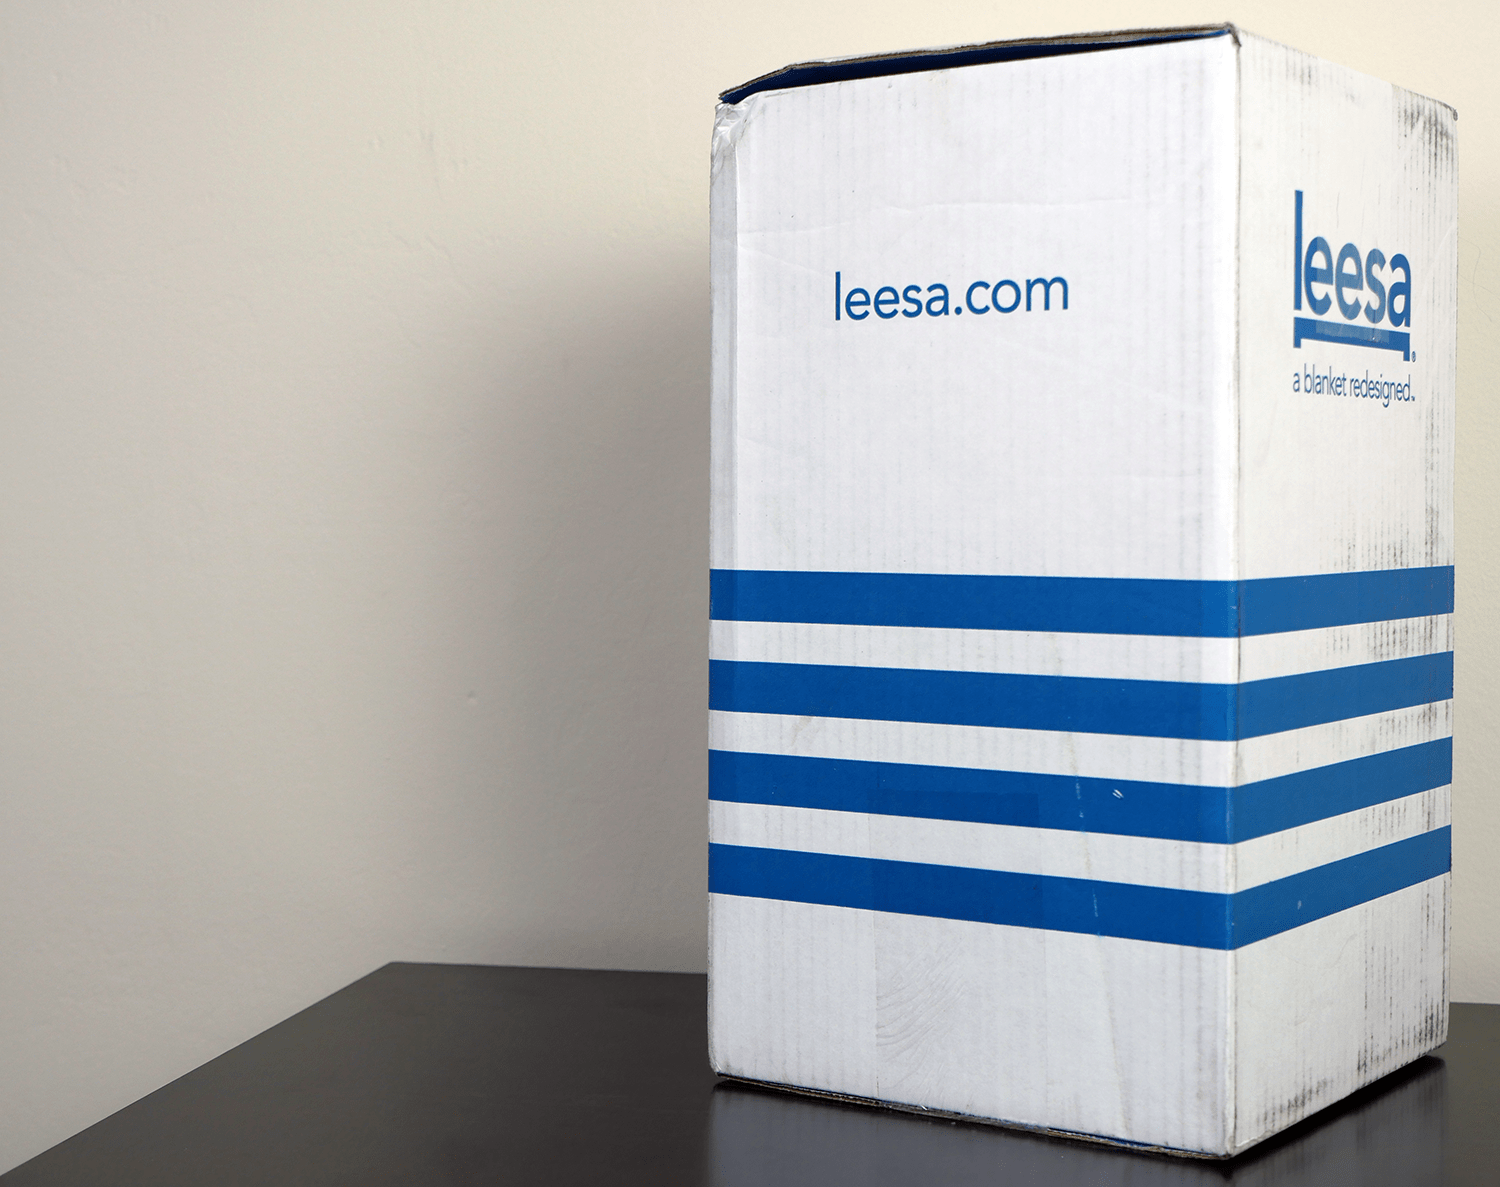 The Leesa blanket arrives in a box identical to their mattress, only much smaller